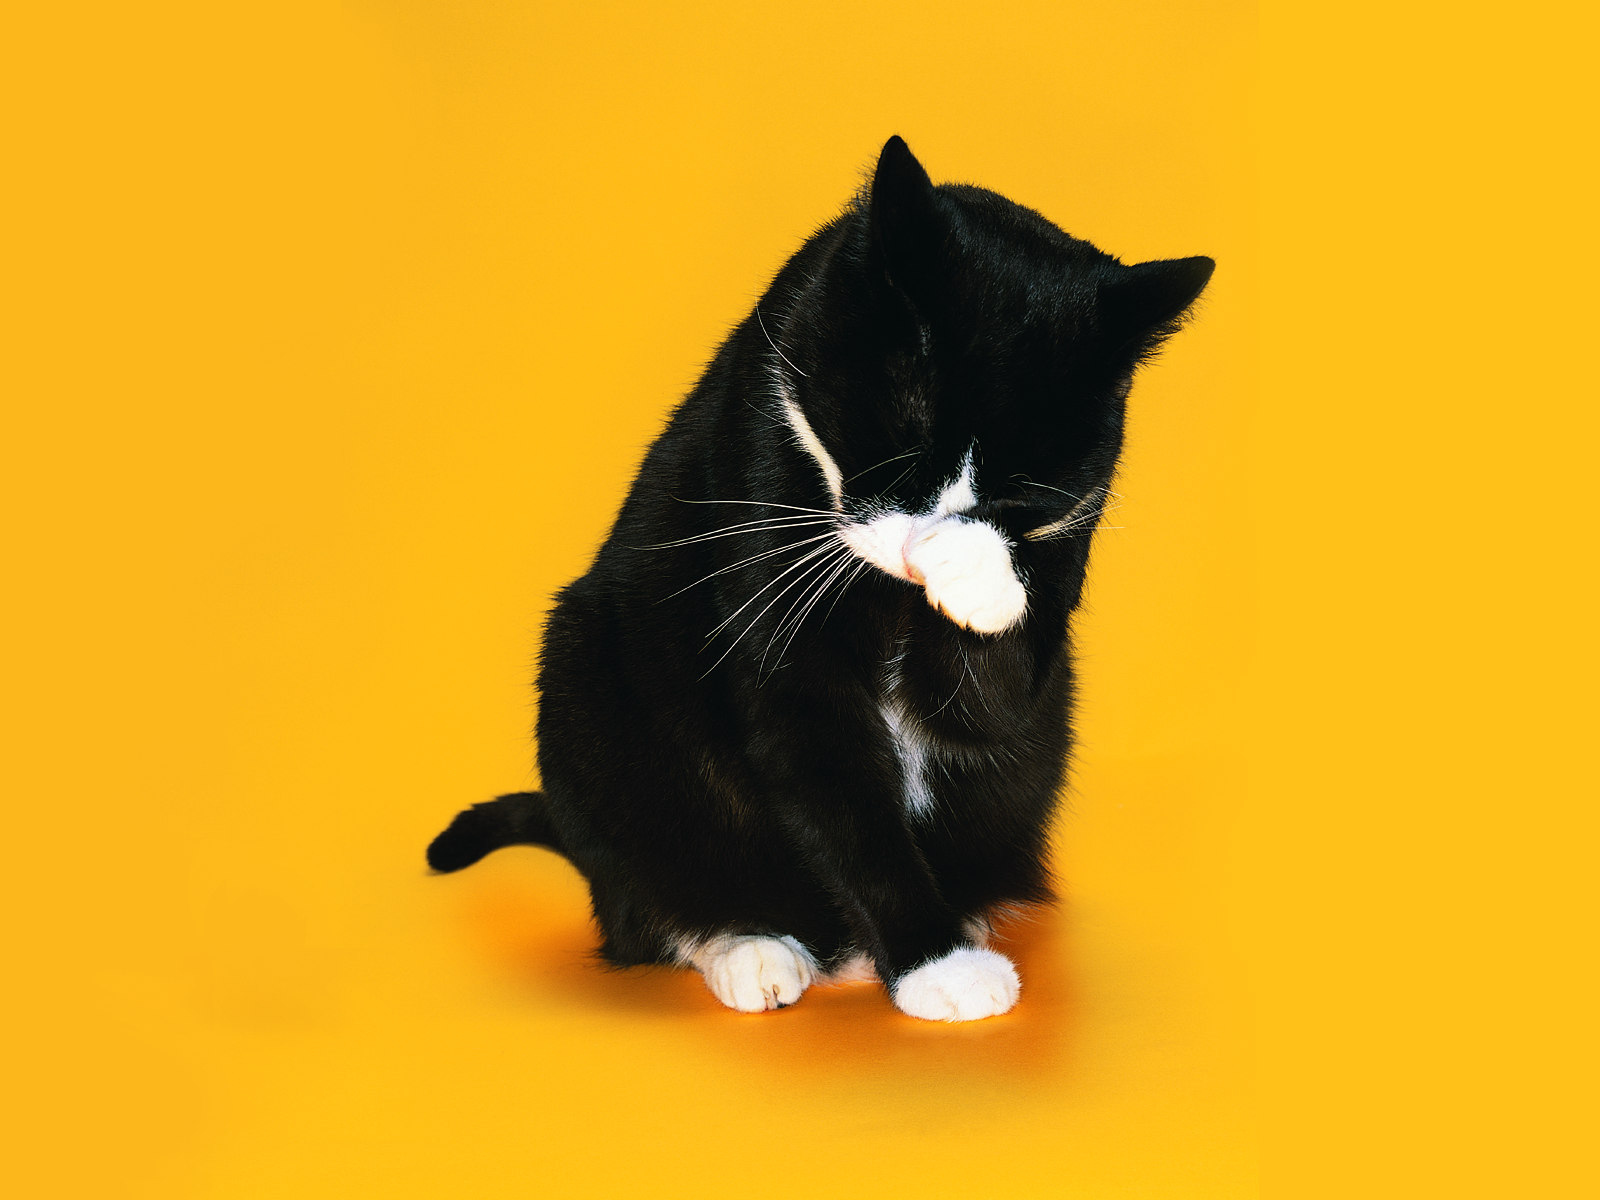 Black and white cat washes on a yellow background Desktop wallpaper 1600x1200